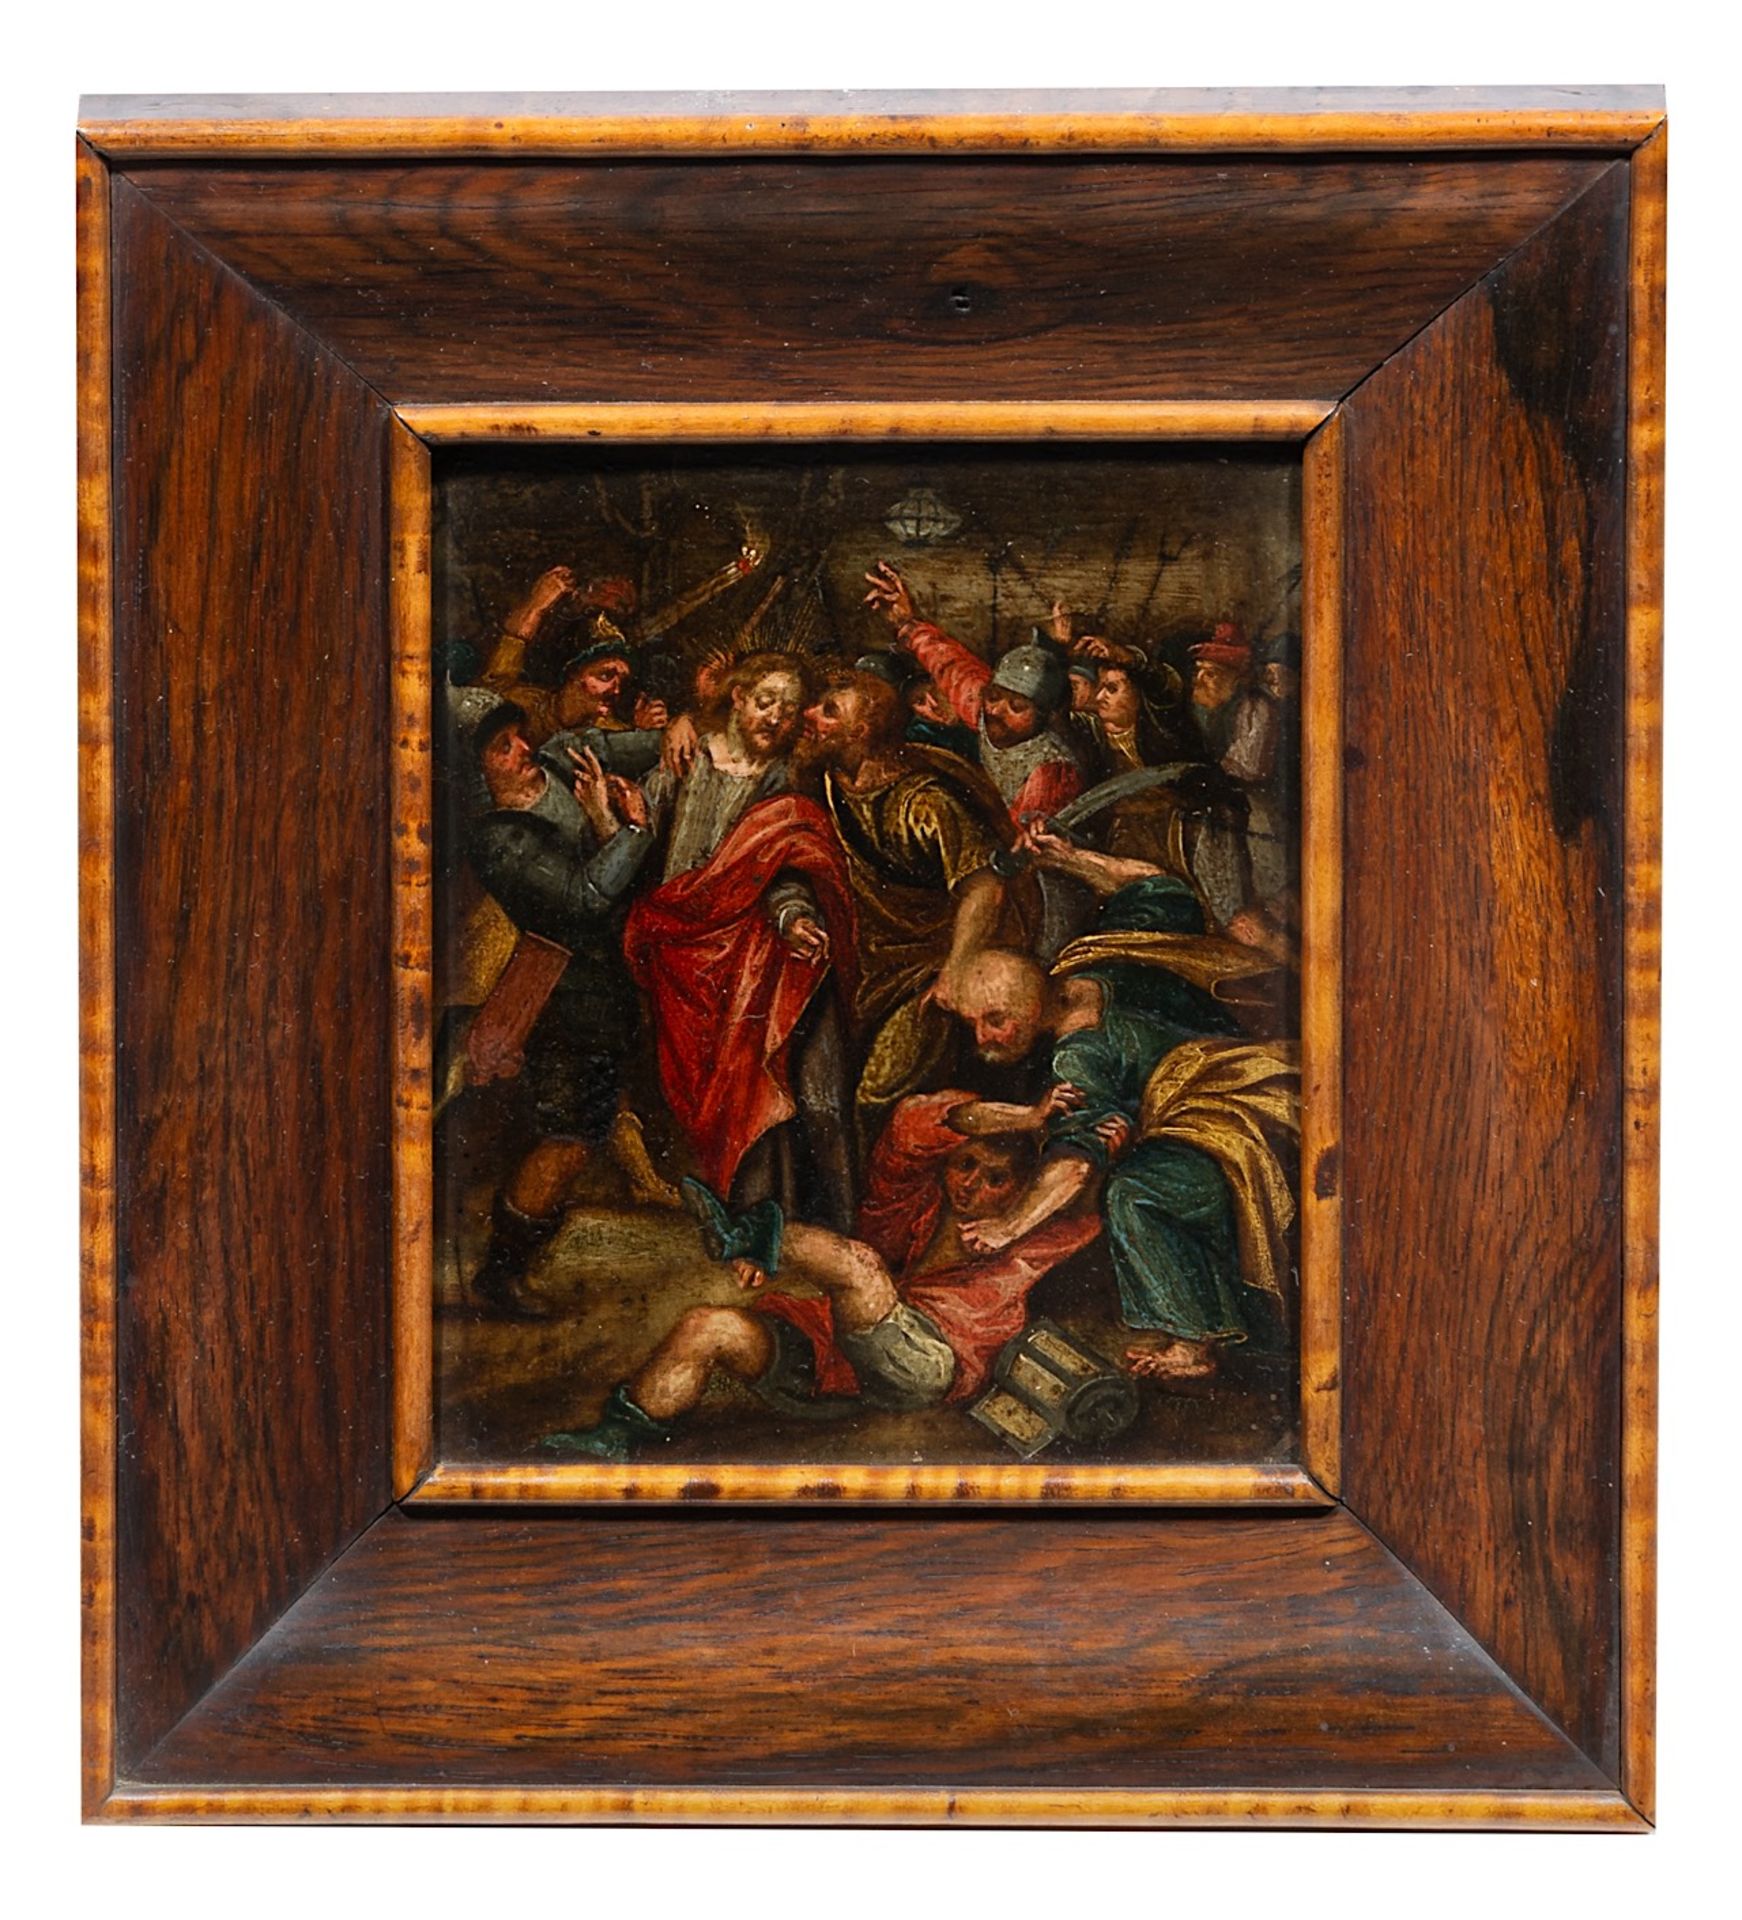 The Arrest of Christ, 17thC, Flemish School, oil on copper 16 x 13 cm. (6.3 x 5.1 in.), Frame: 26 x - Image 2 of 5